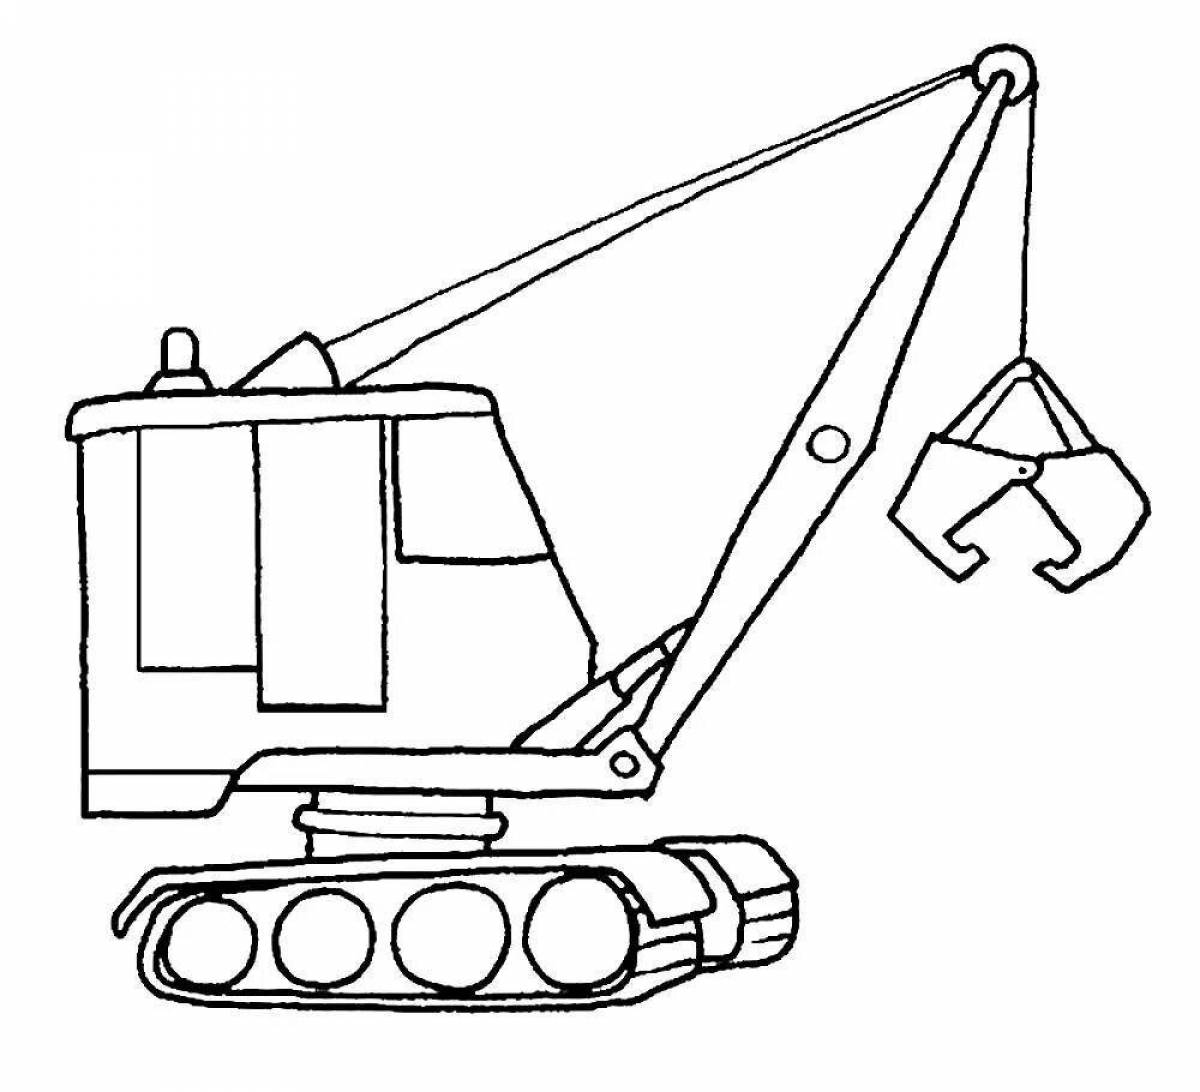 Unusual coloring of construction equipment for children 6-7 years old